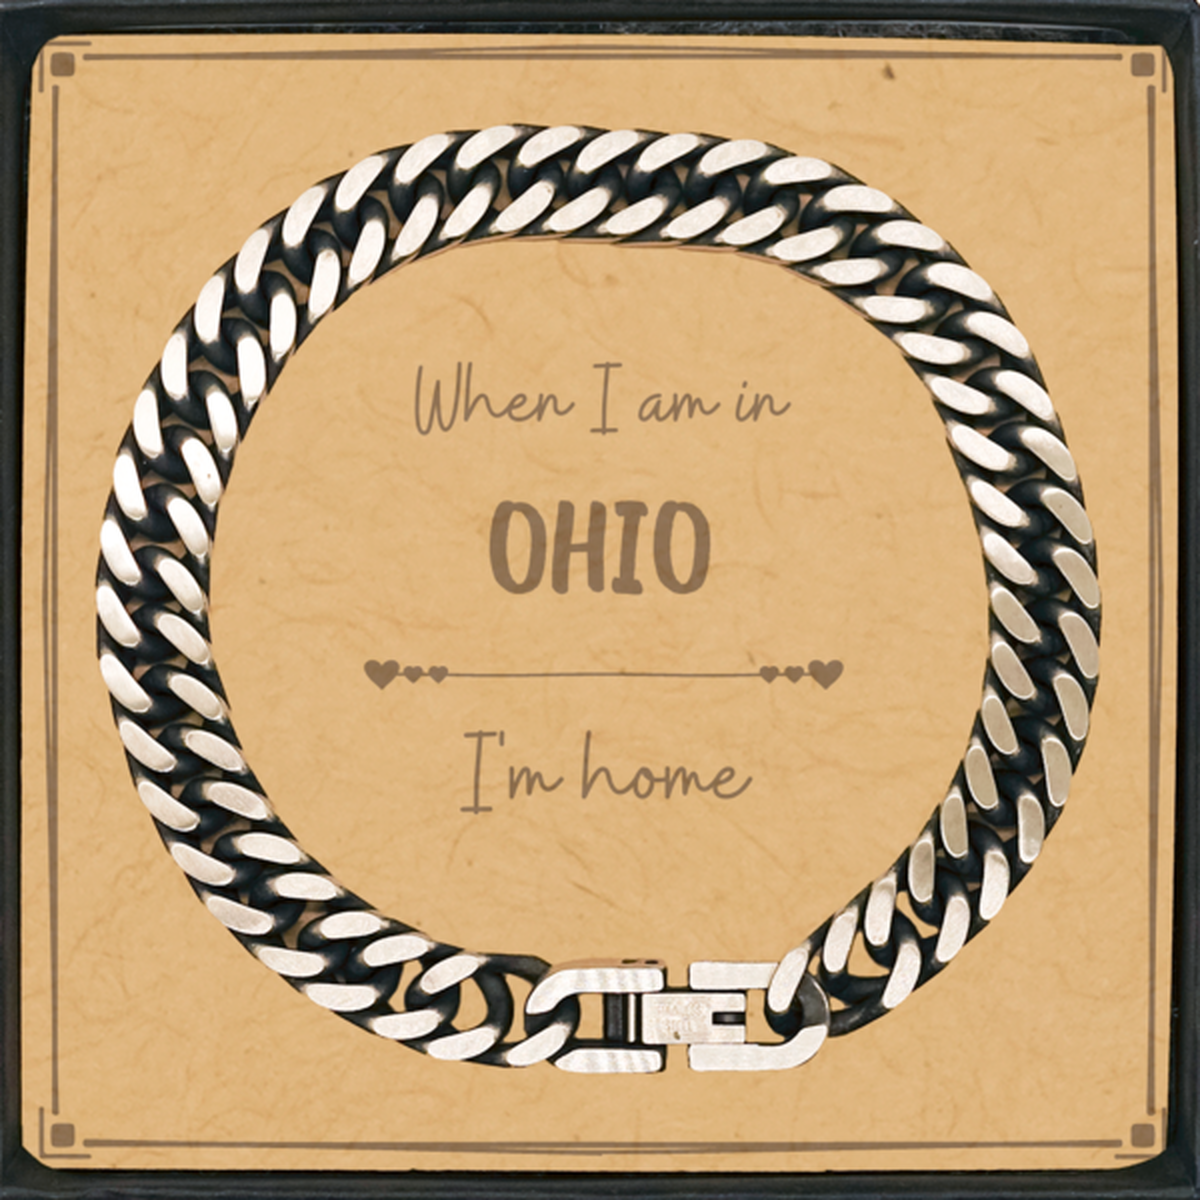 When I am in Ohio I'm home Cuban Link Chain Bracelet, Message Card Gifts For Ohio, State Ohio Birthday Gifts for Friends Coworker